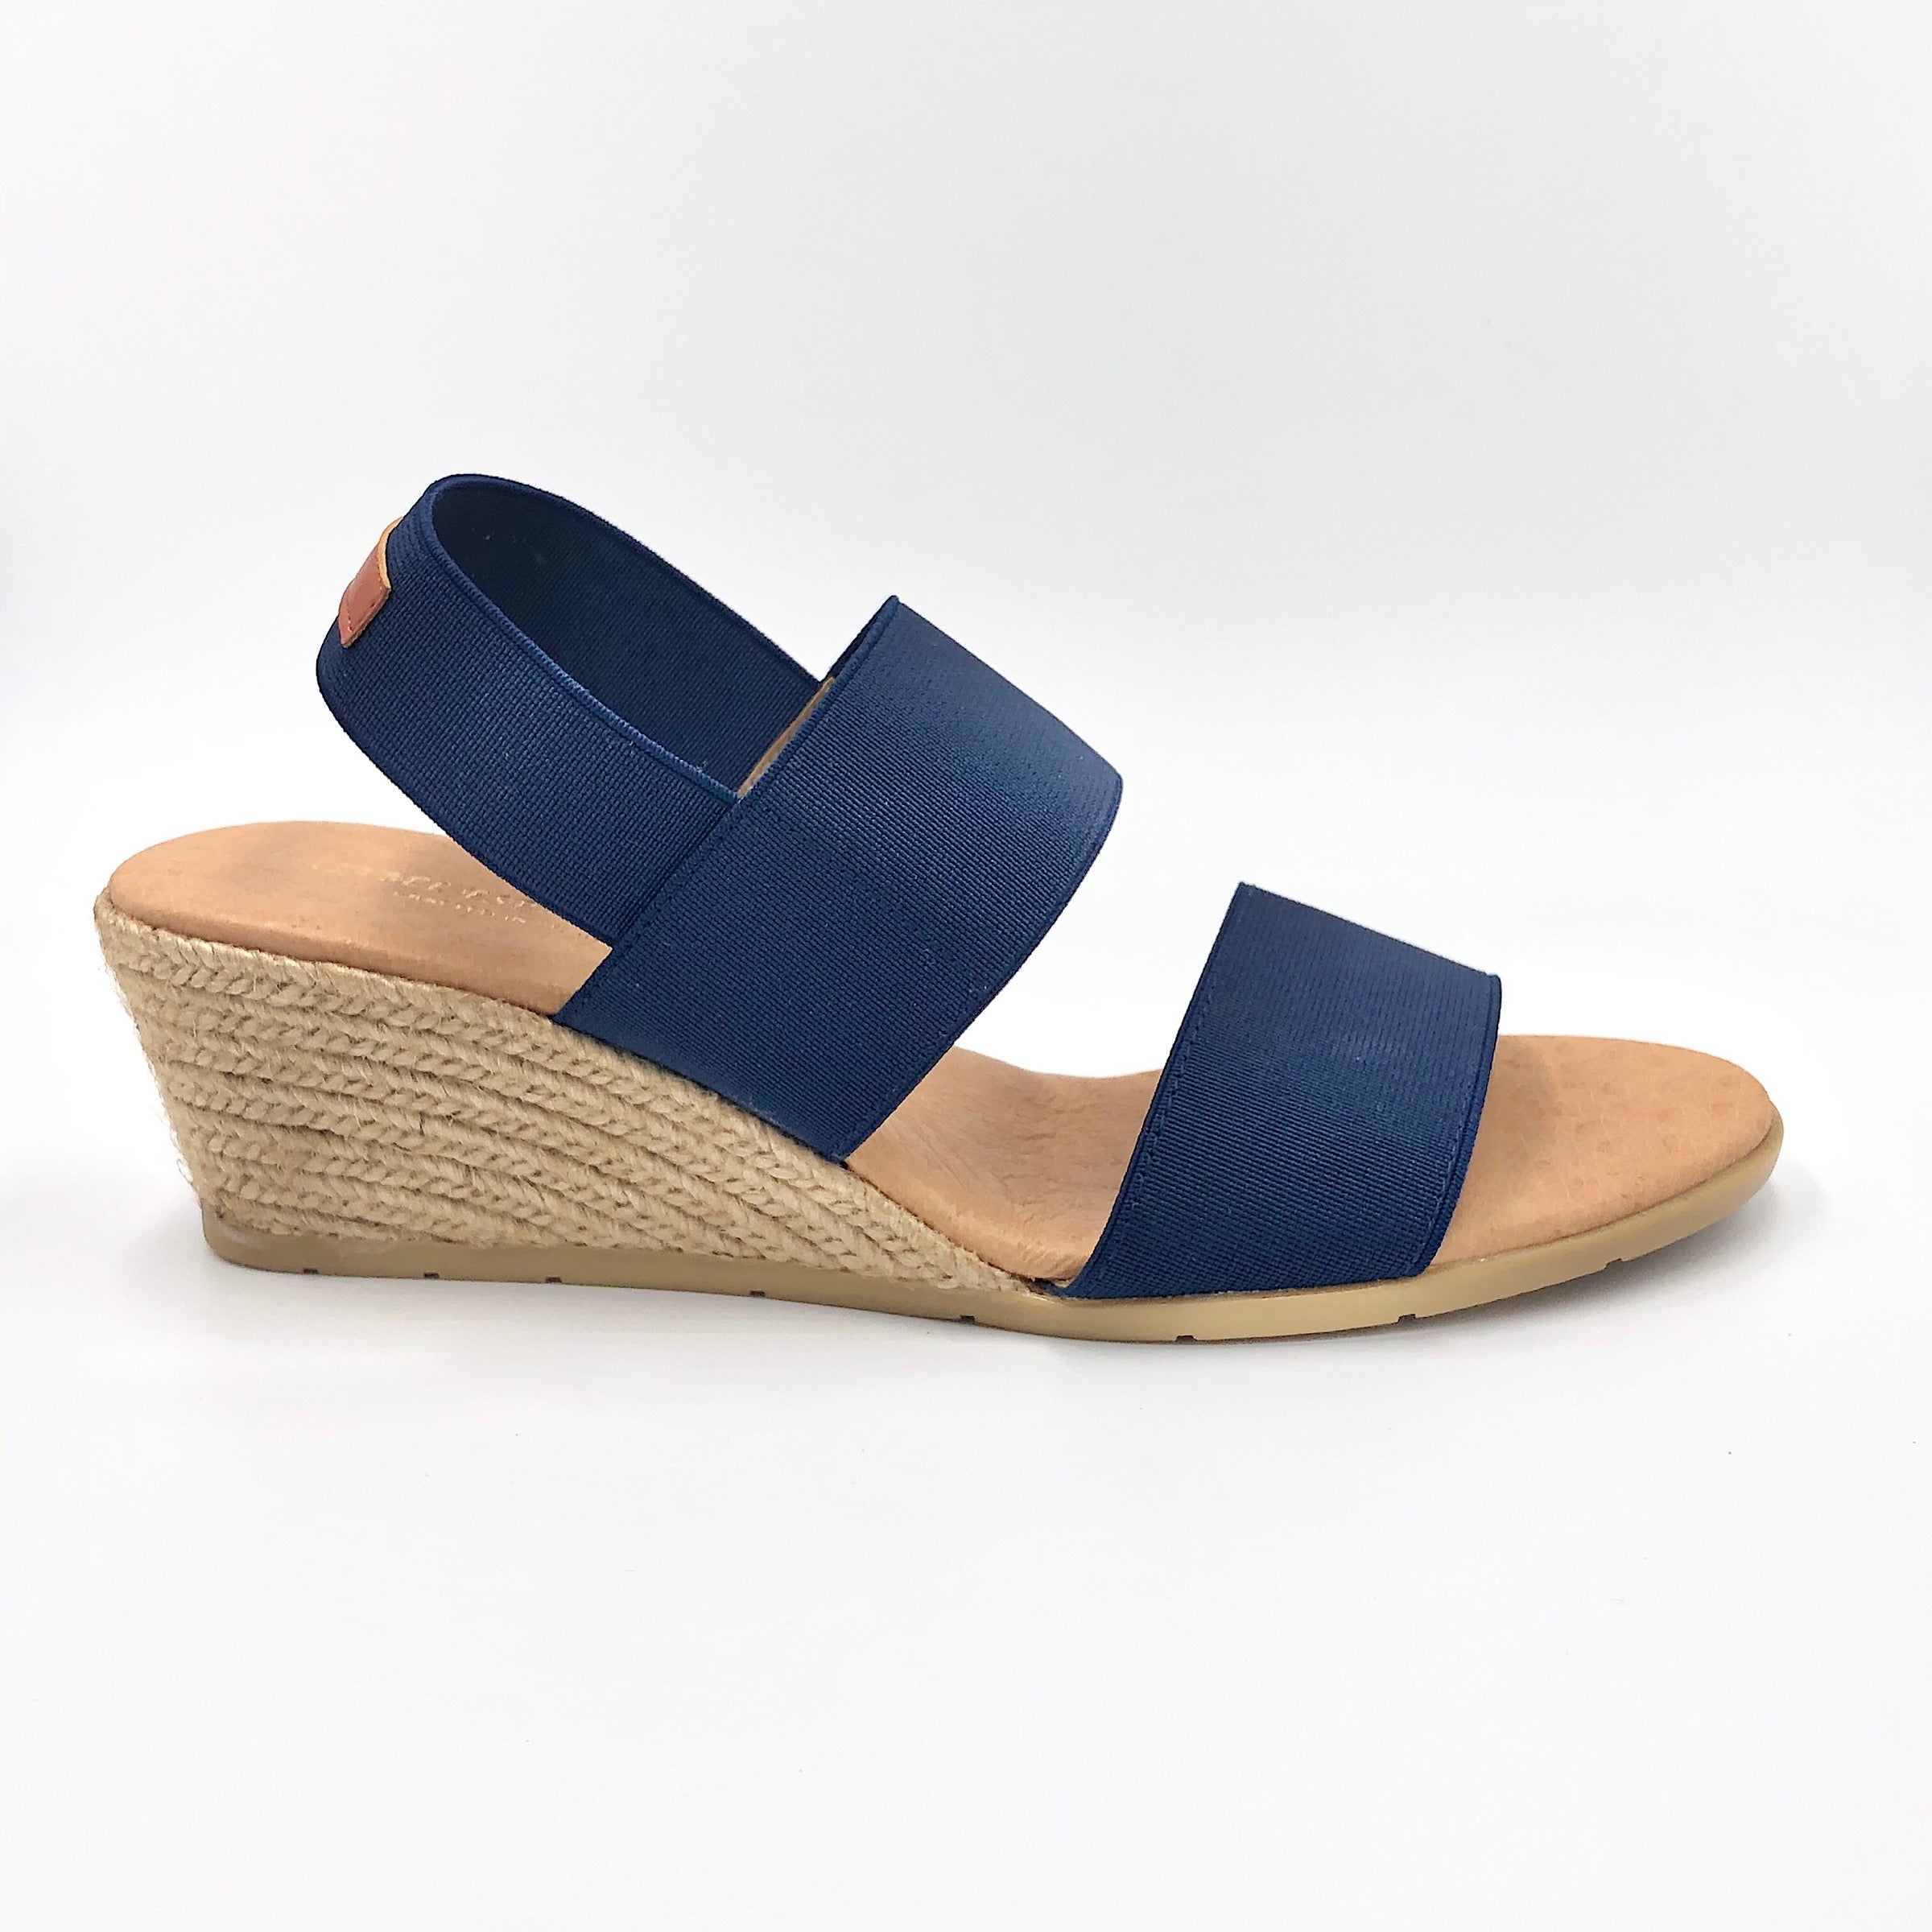 Betty - The Elastic 2 Band Espadrille in Navy